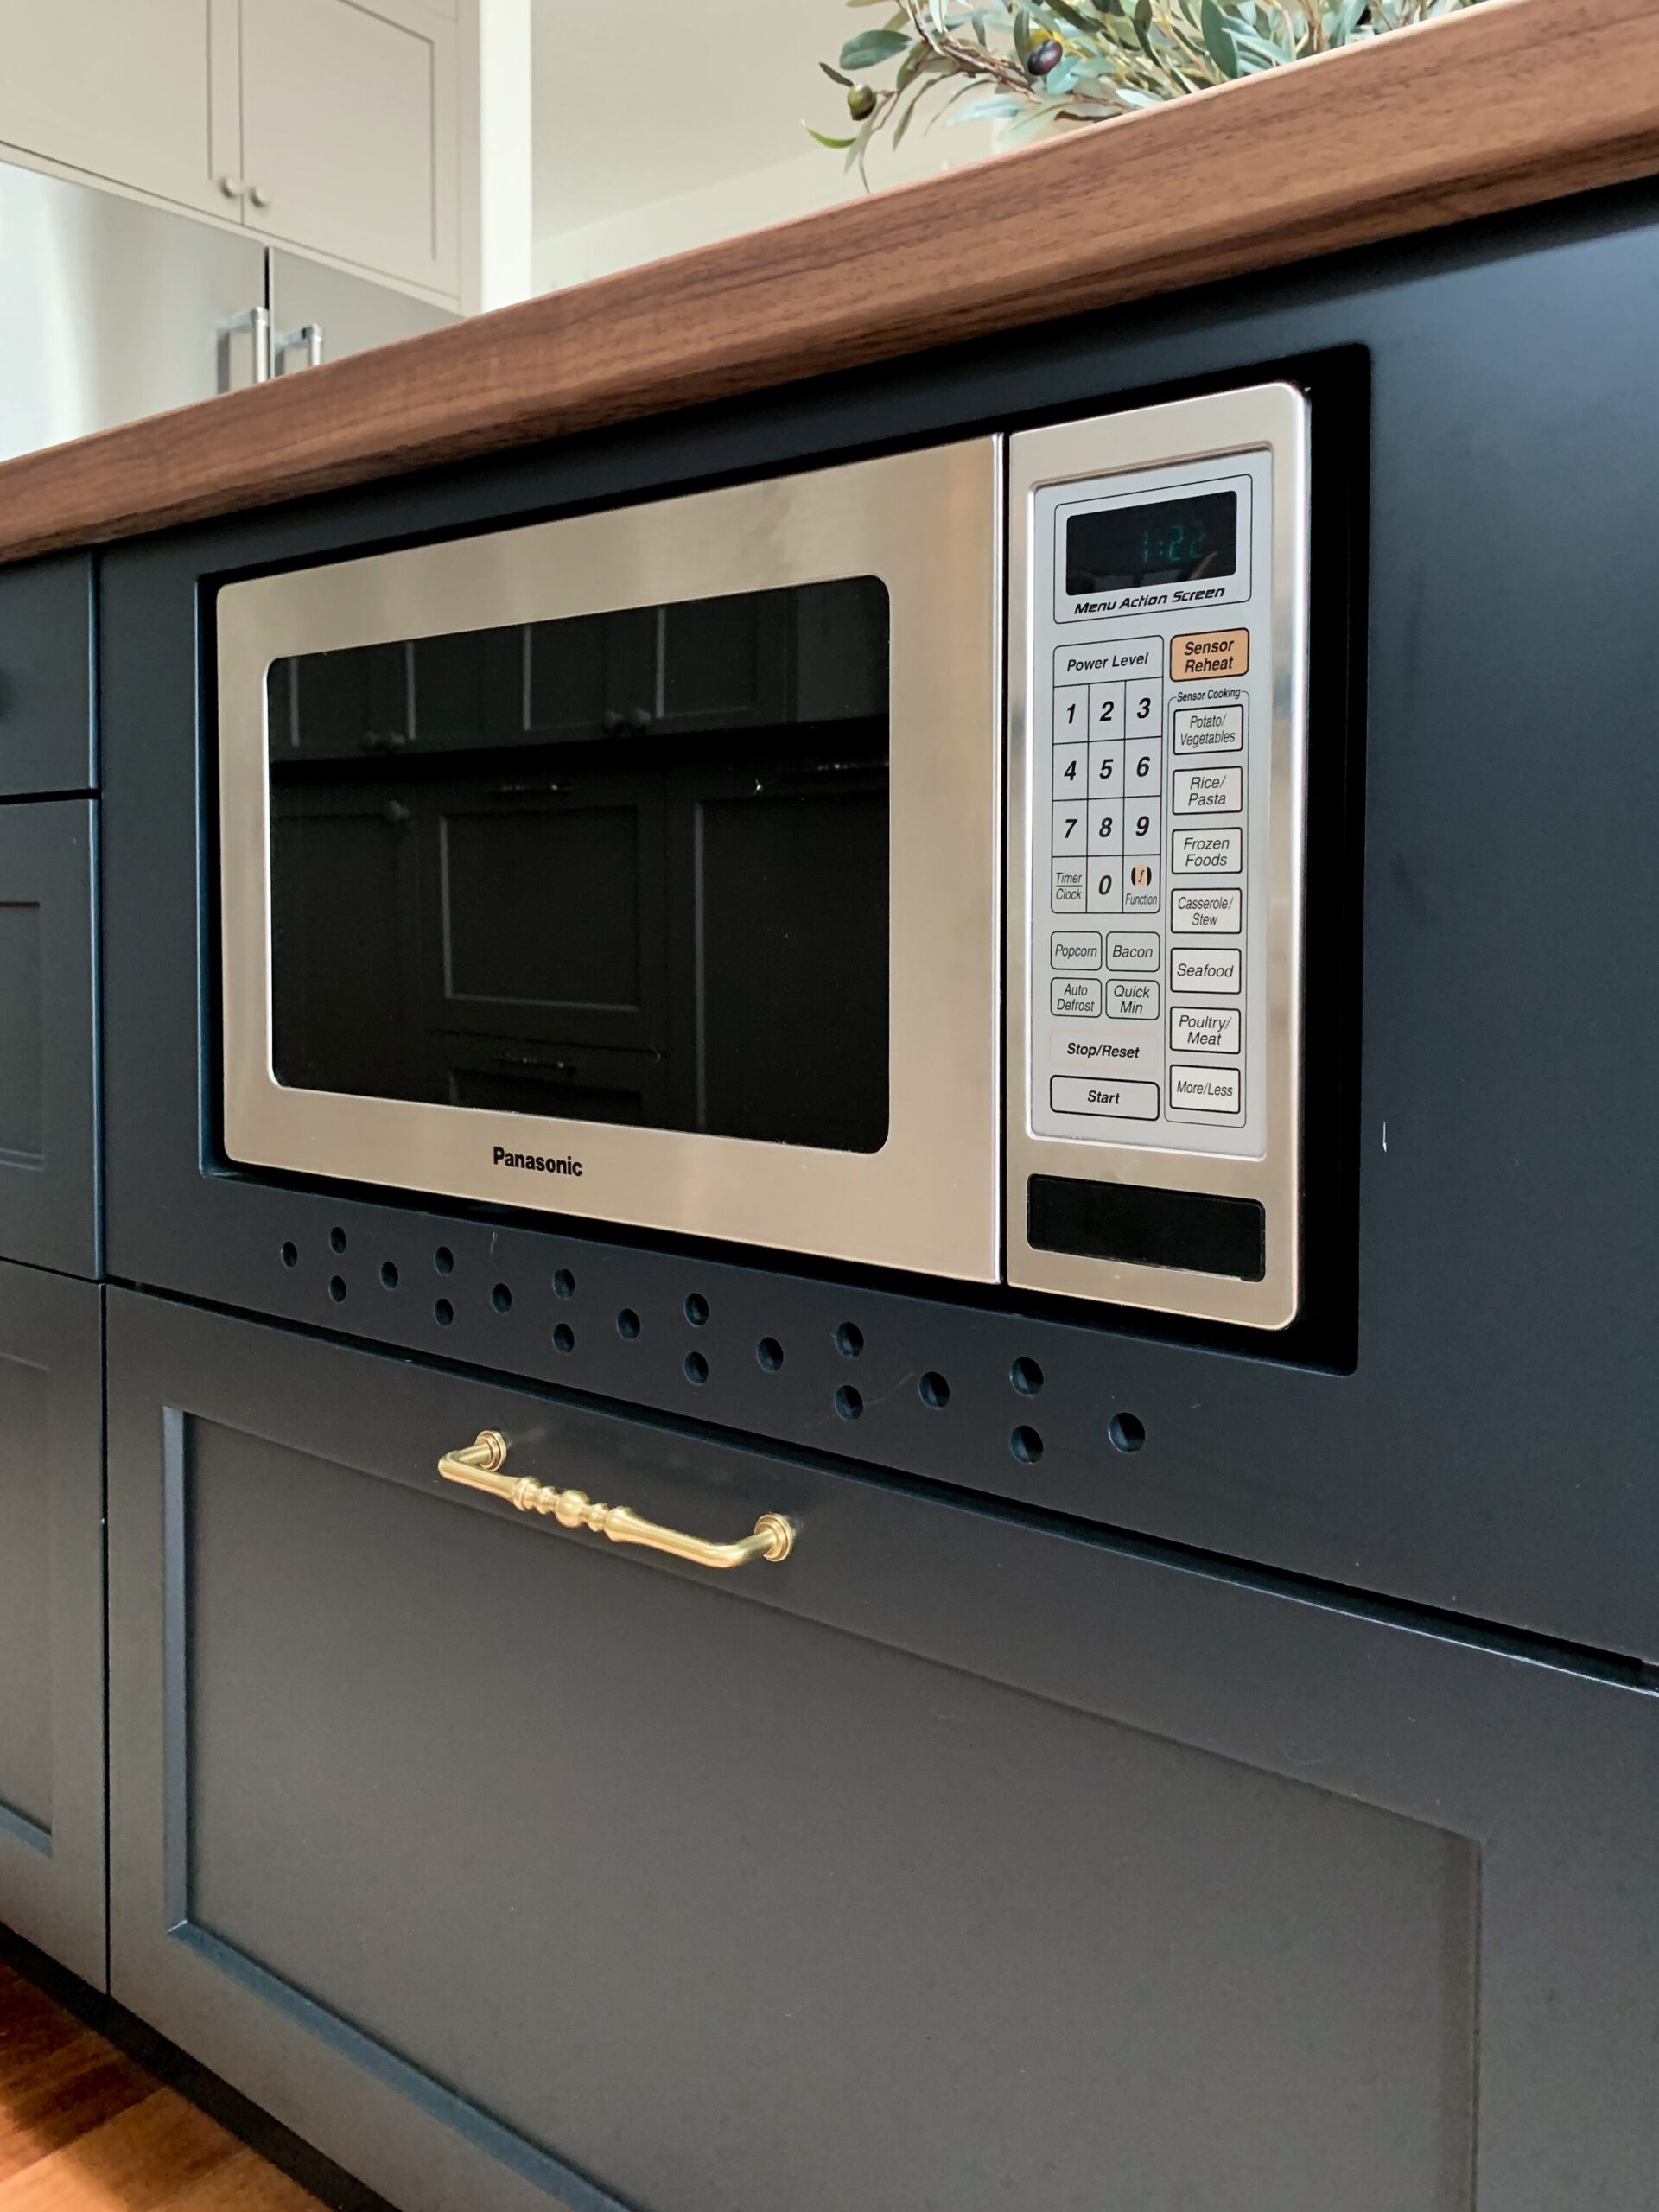 Microwave with cusgtom vent cover with small vent holes in black island under countertop